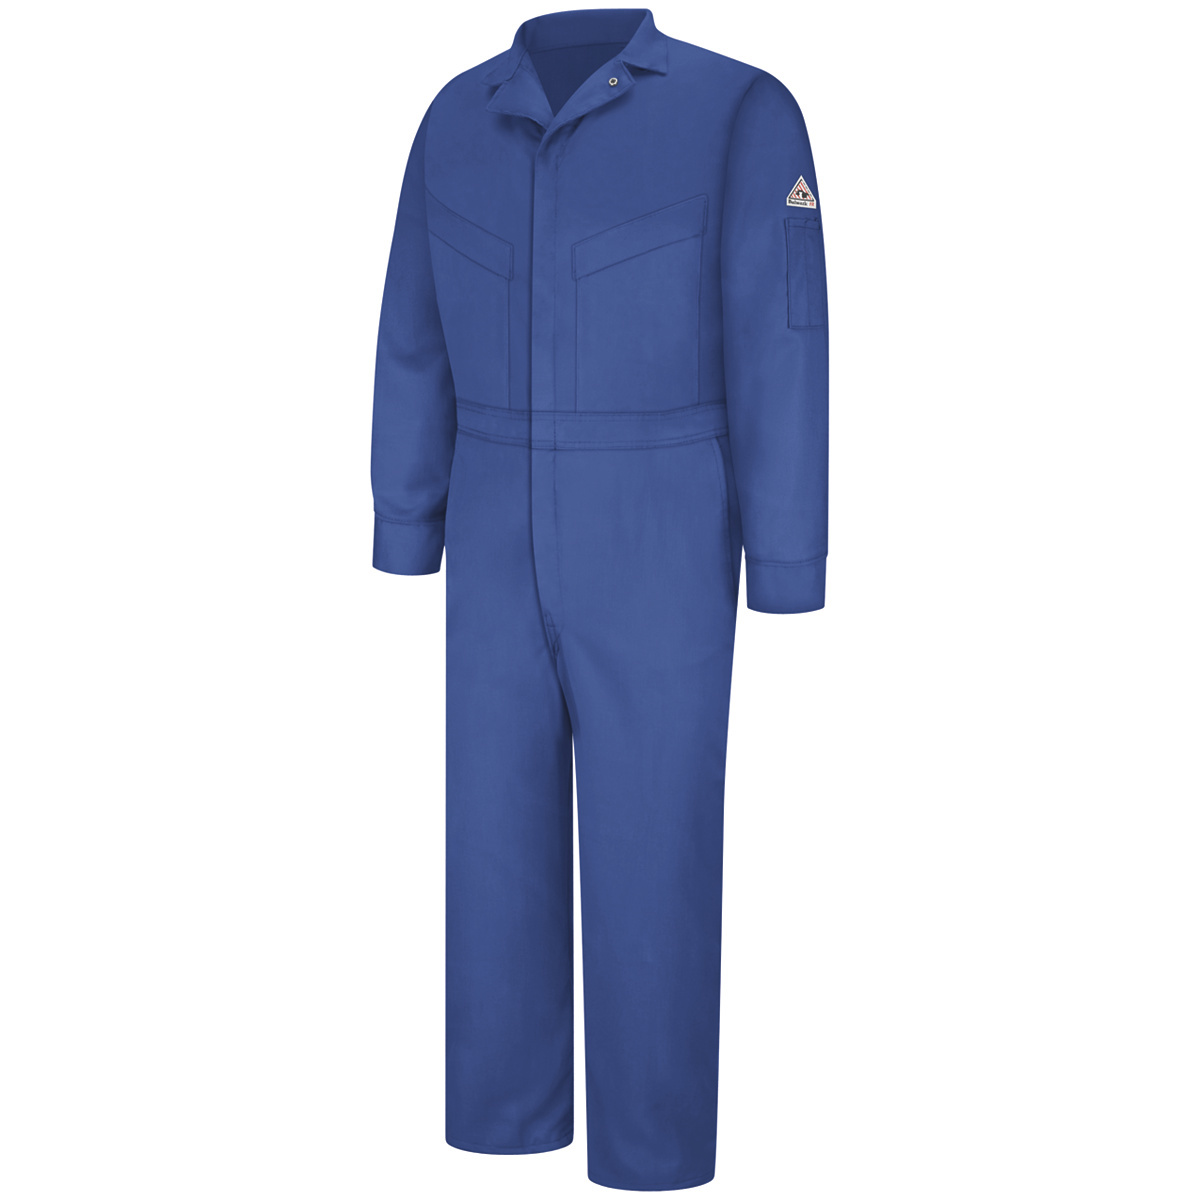 Bulwark® 36 Regular Royal Blue EXCEL FR® ComforTouch® Sateen/Cotton/Nylon Water Repellent Flame Resistant Coveralls With Zipper